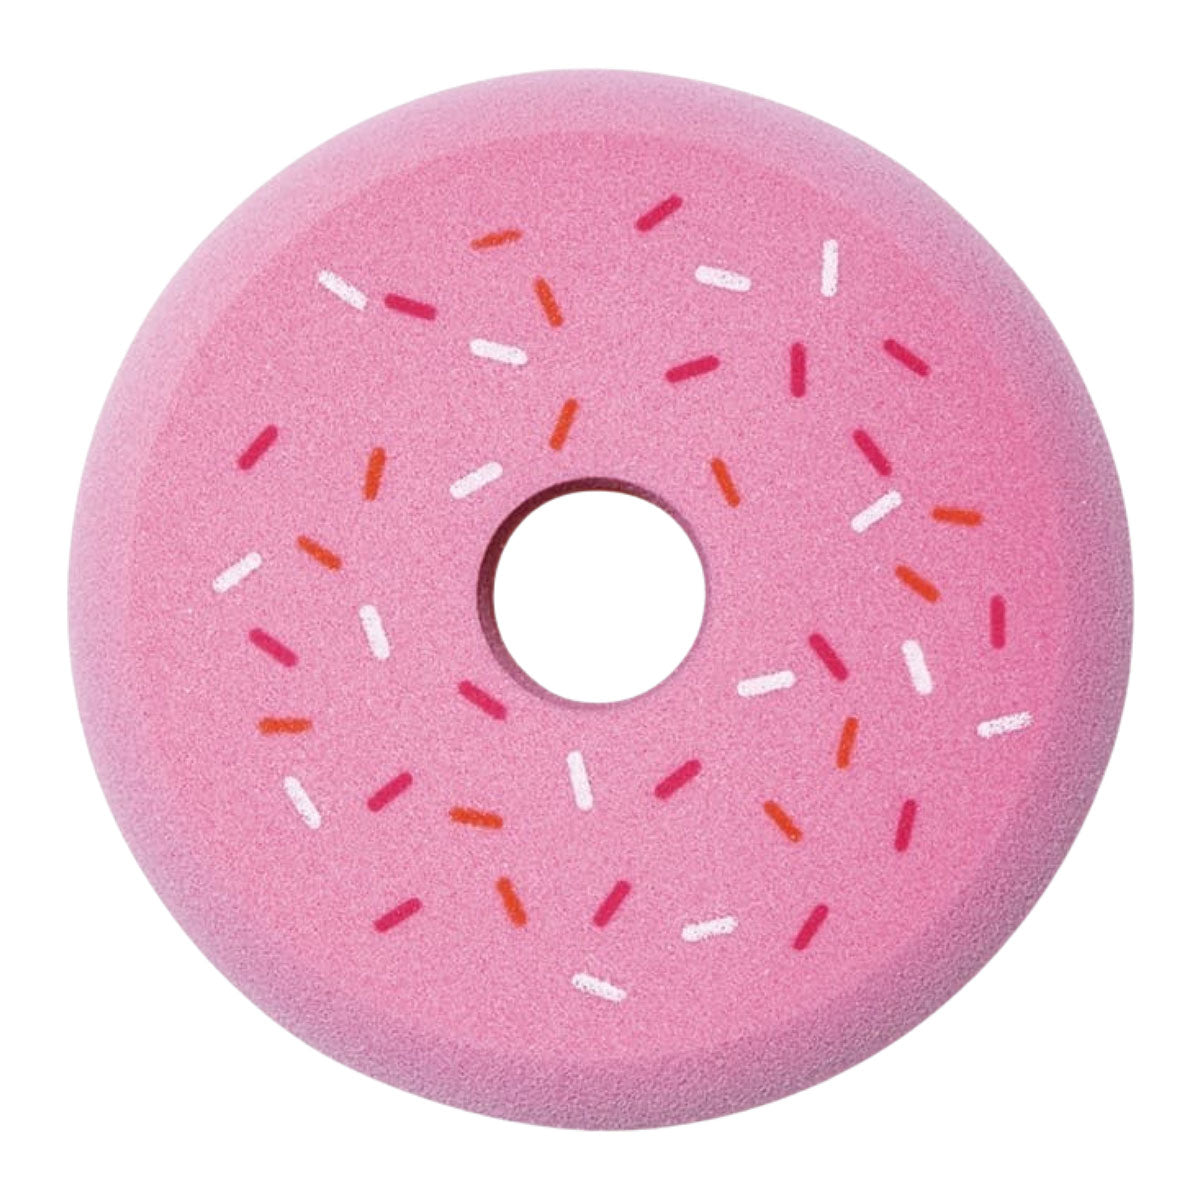 e.l.f x DNKN' Strawberry Frosted With Sprinkles Face Sponge